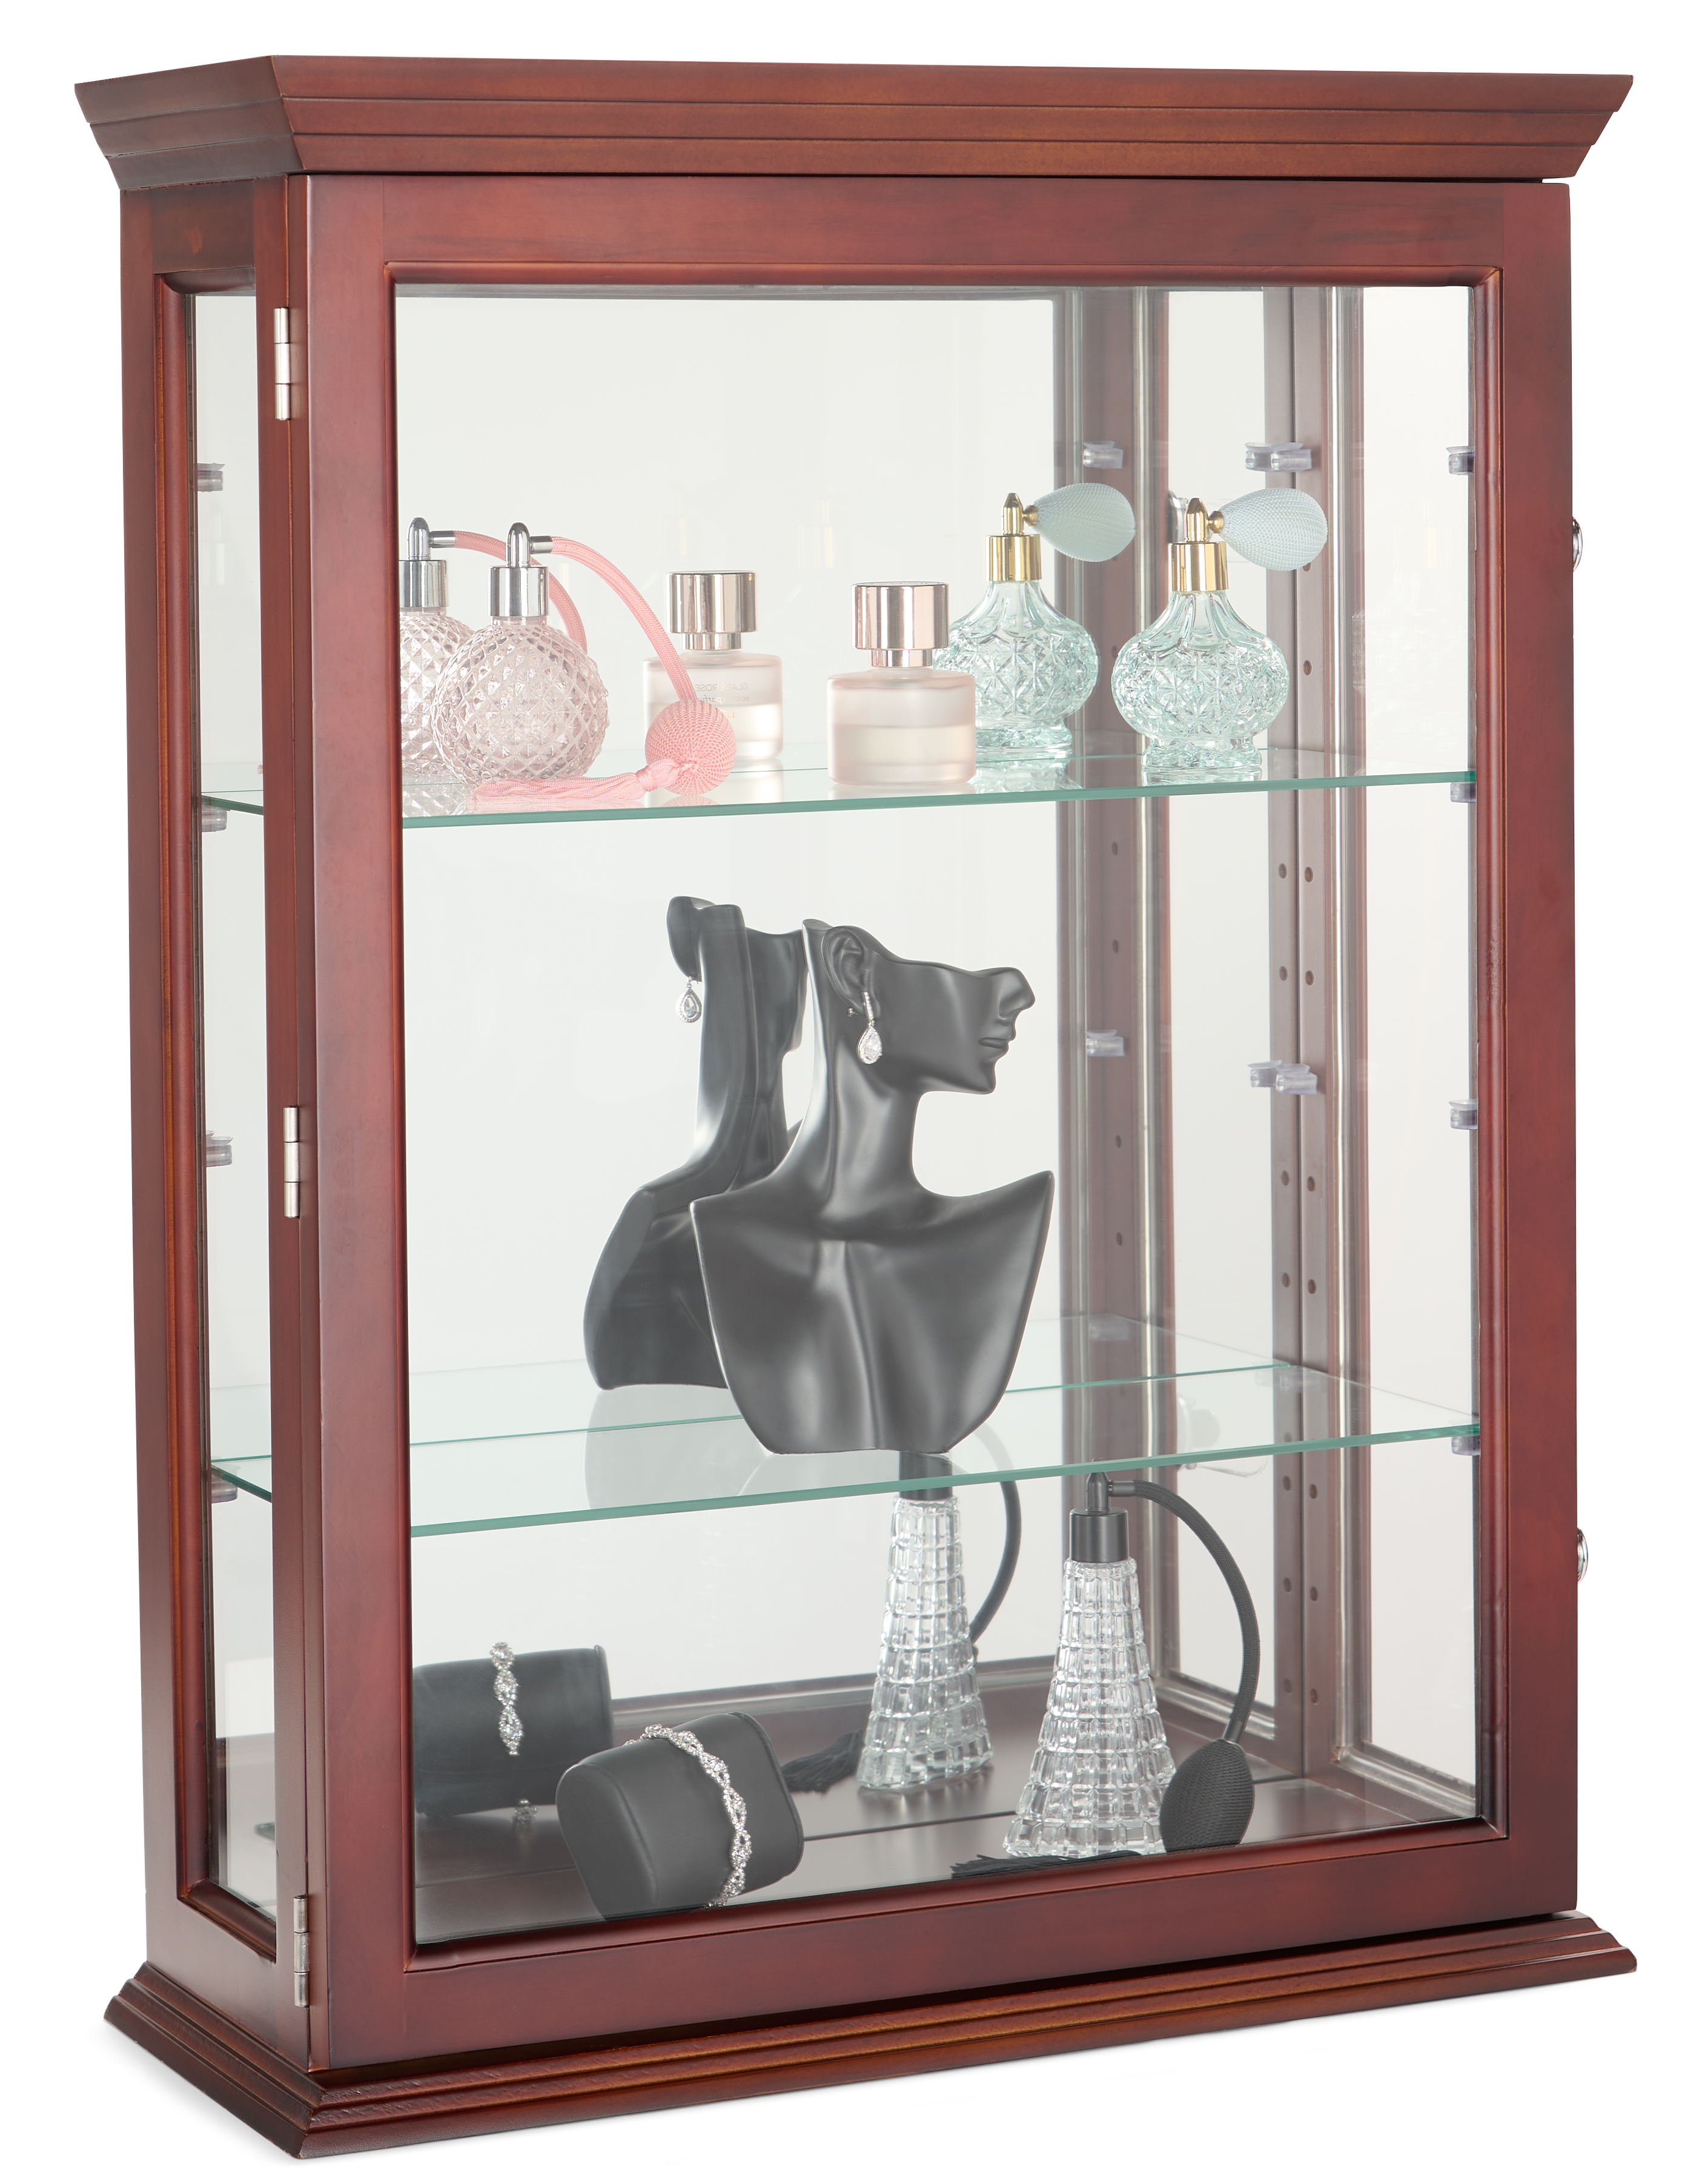 Wall Mounted Curio Cabinet Tempered Glass Shelves And Panels